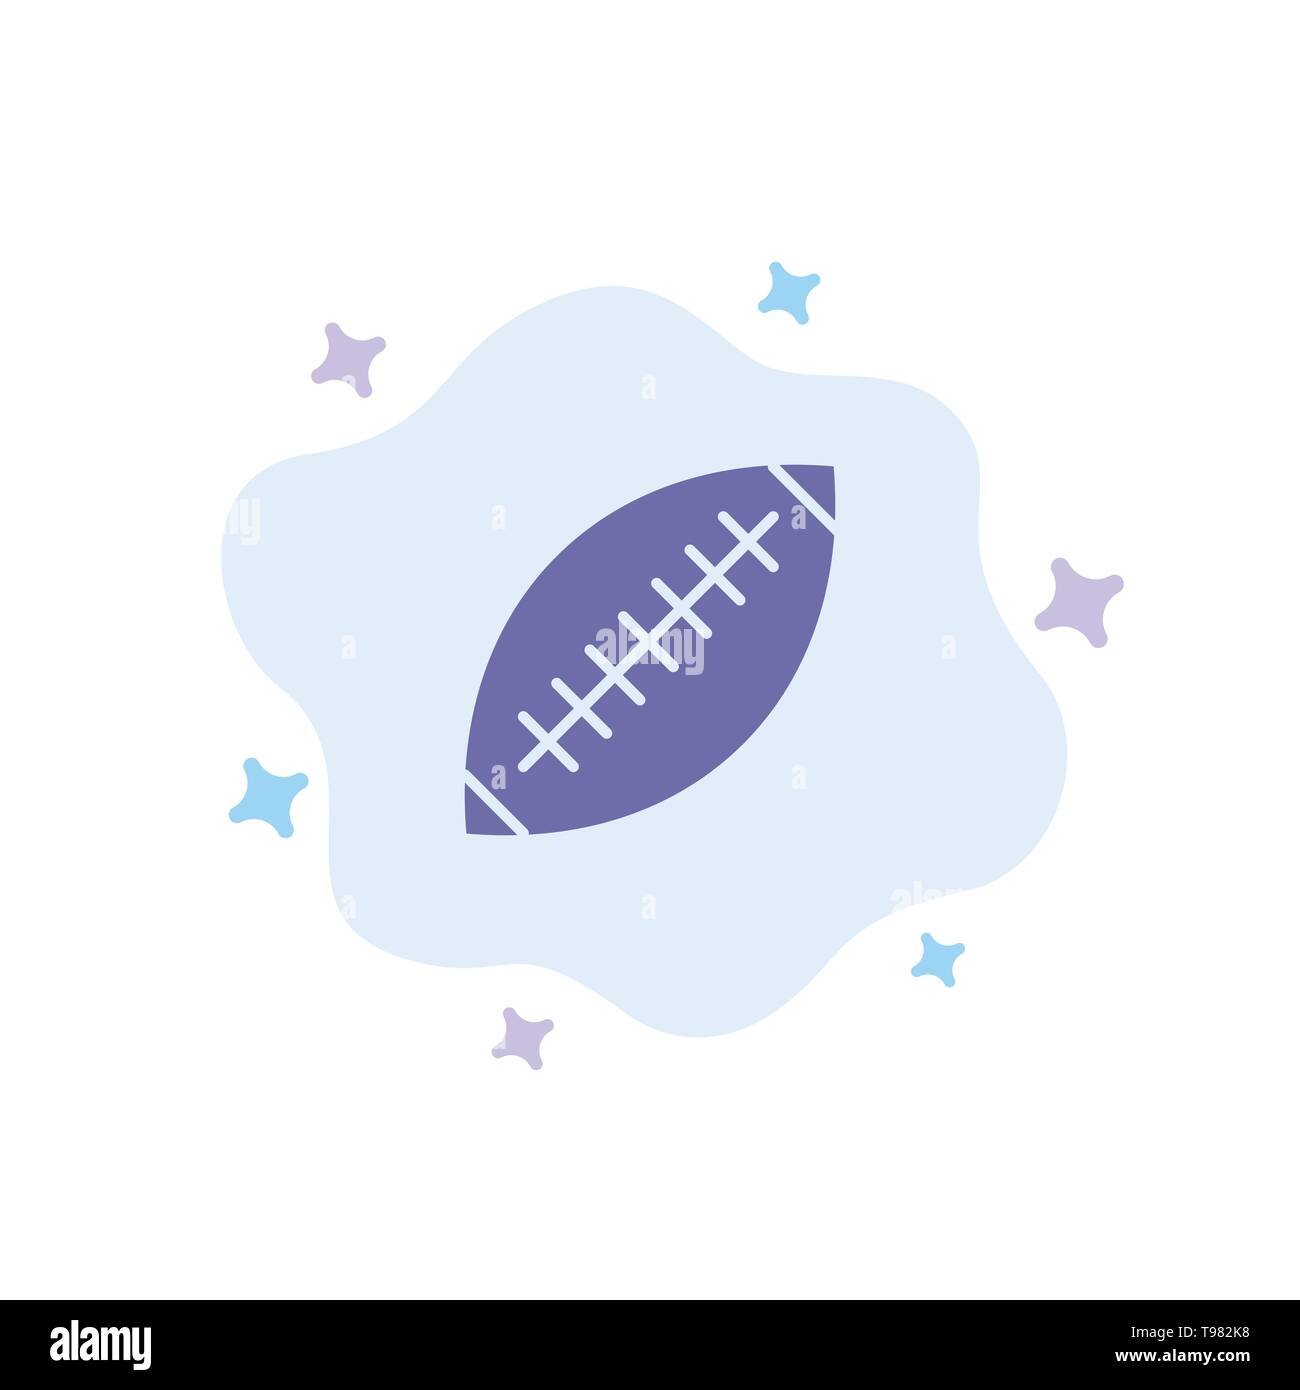 Afl, Australia, Football, Rugby, Rugby Ball, Sport, Sydney Blue Icon on Abstract Cloud Background Stock Vector